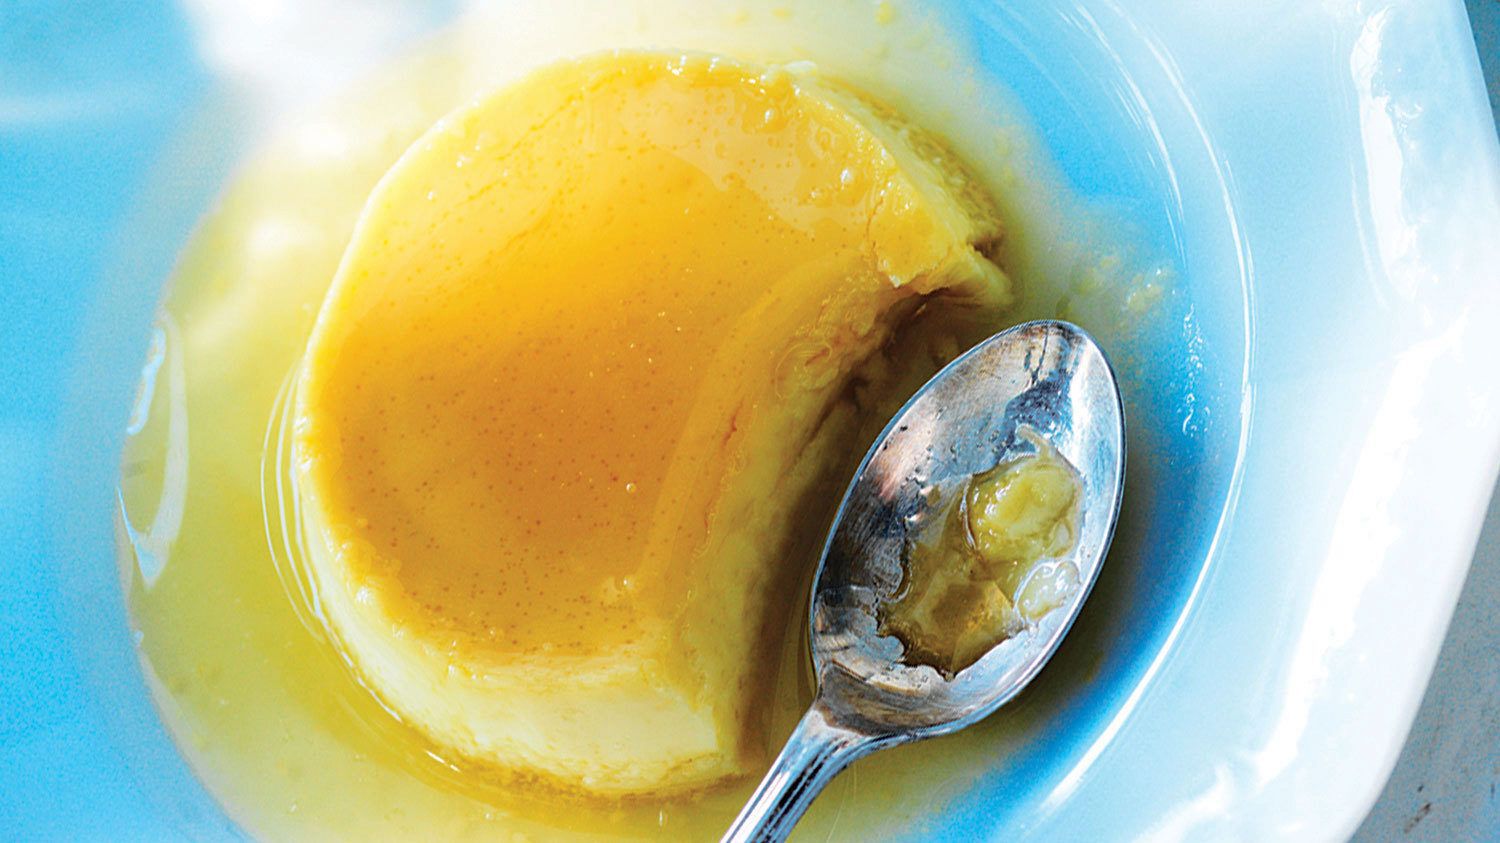 Pineapple Passionfruit Flans